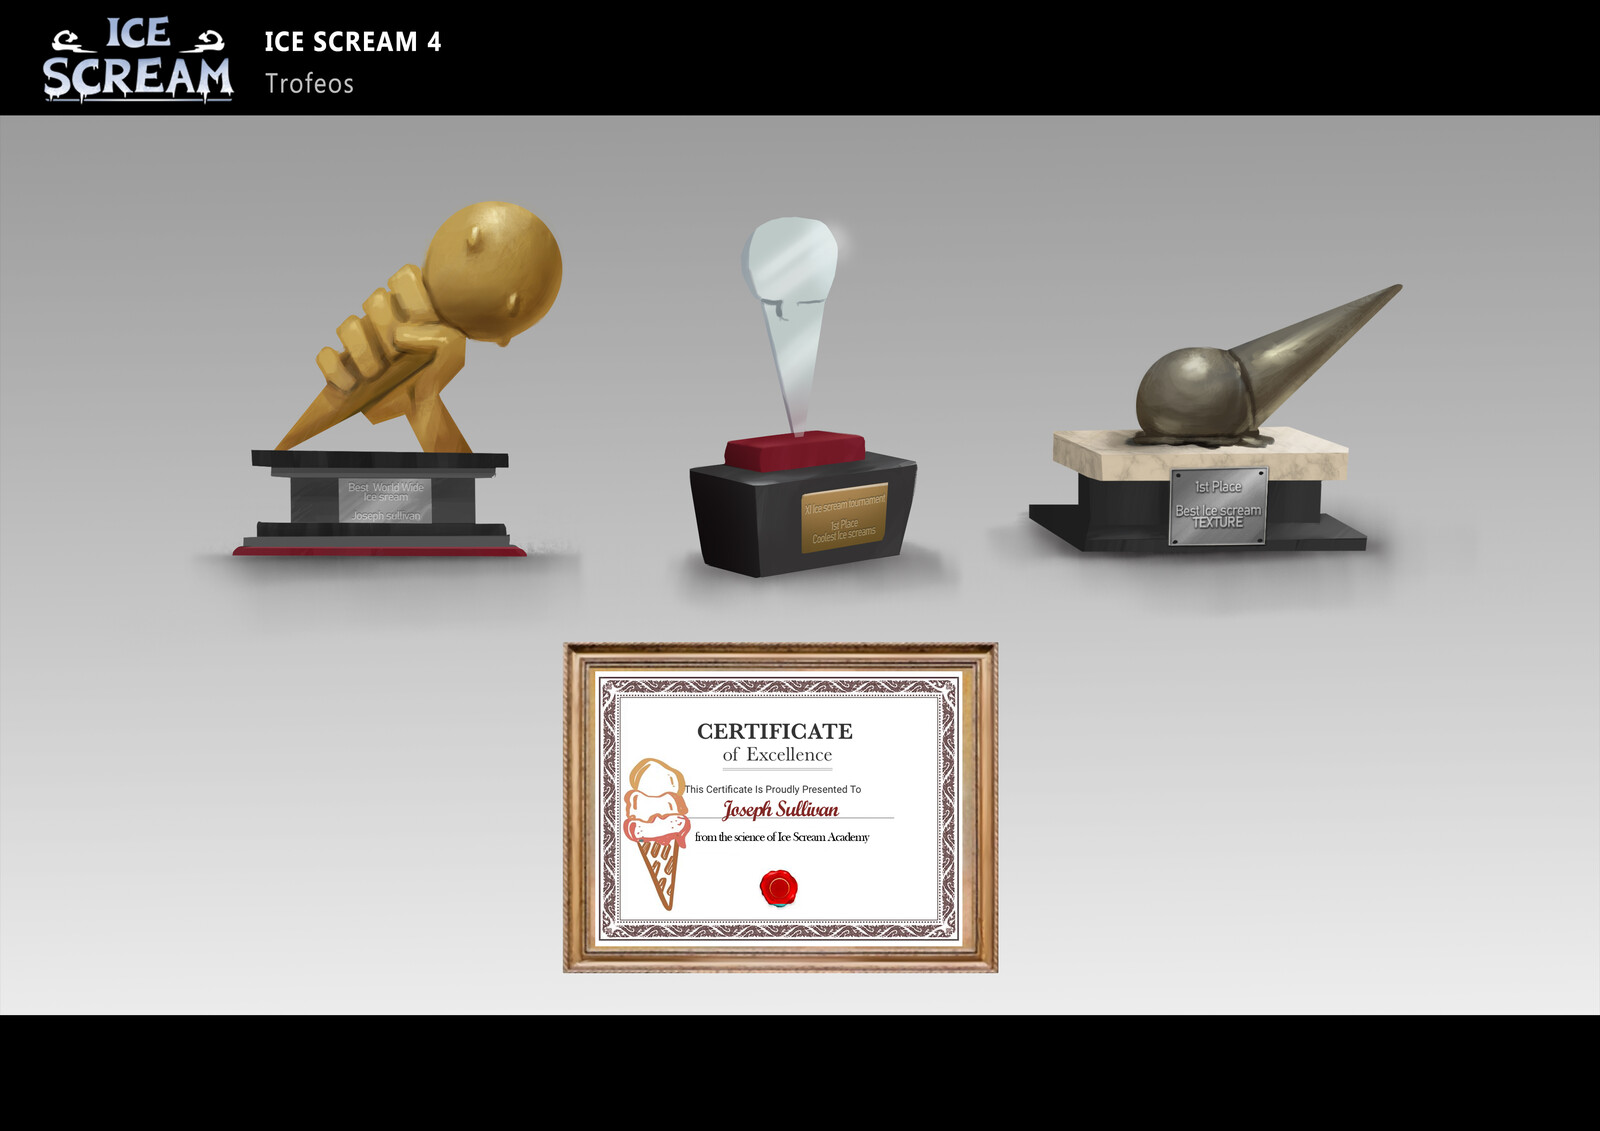 Some trophies from the hall of fame of Joseph´s museum